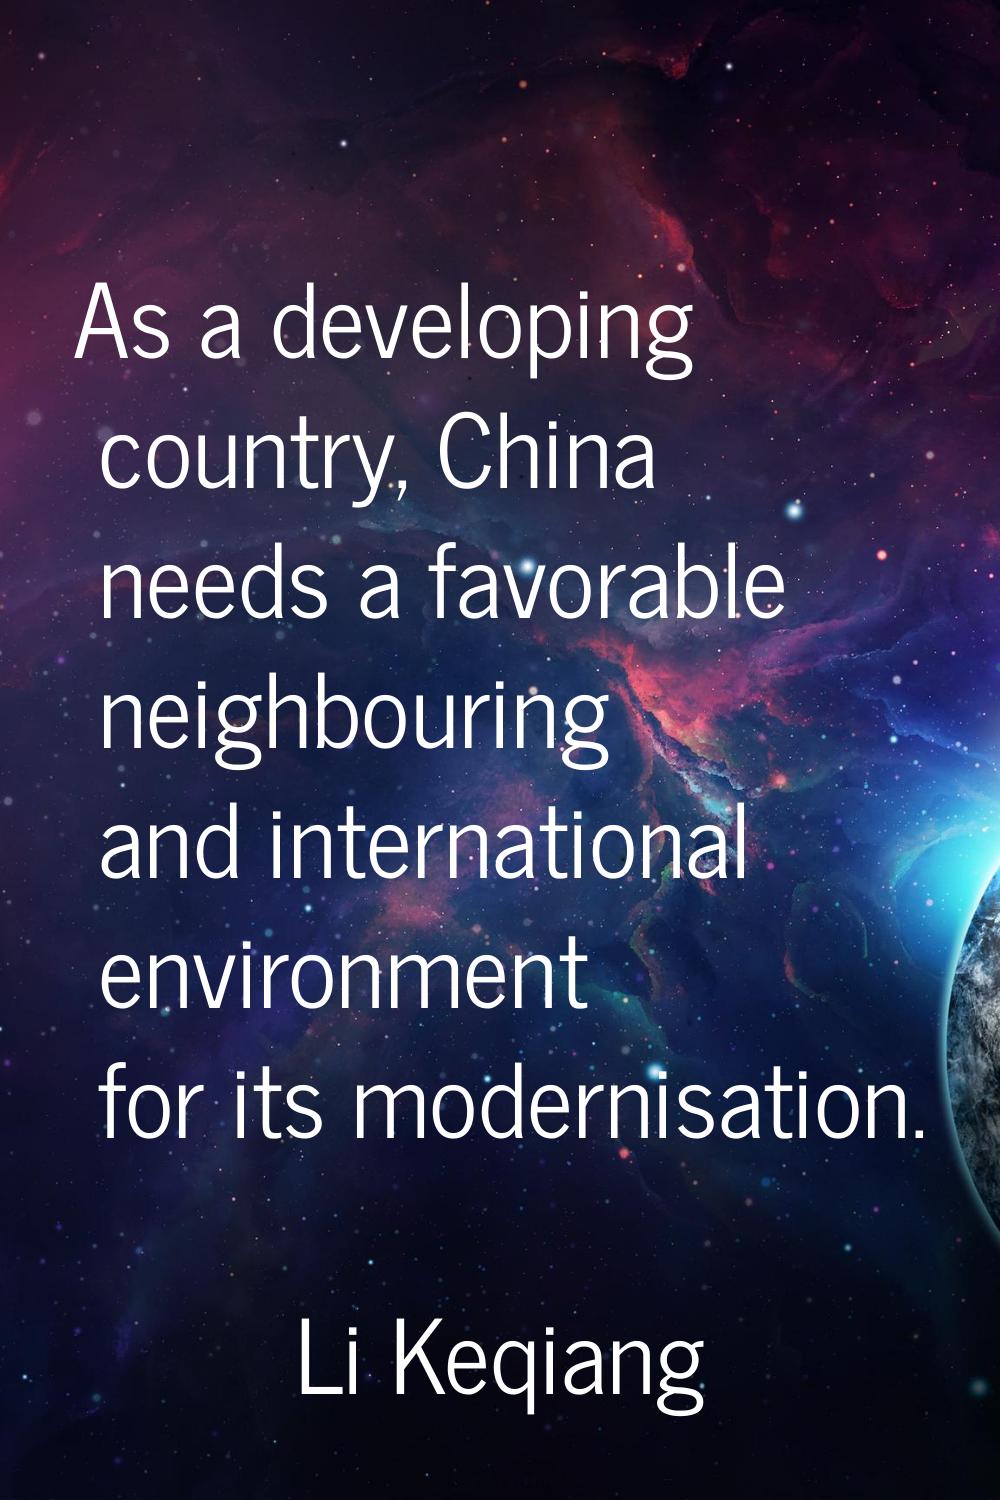 As a developing country, China needs a favorable neighbouring and international environment for its